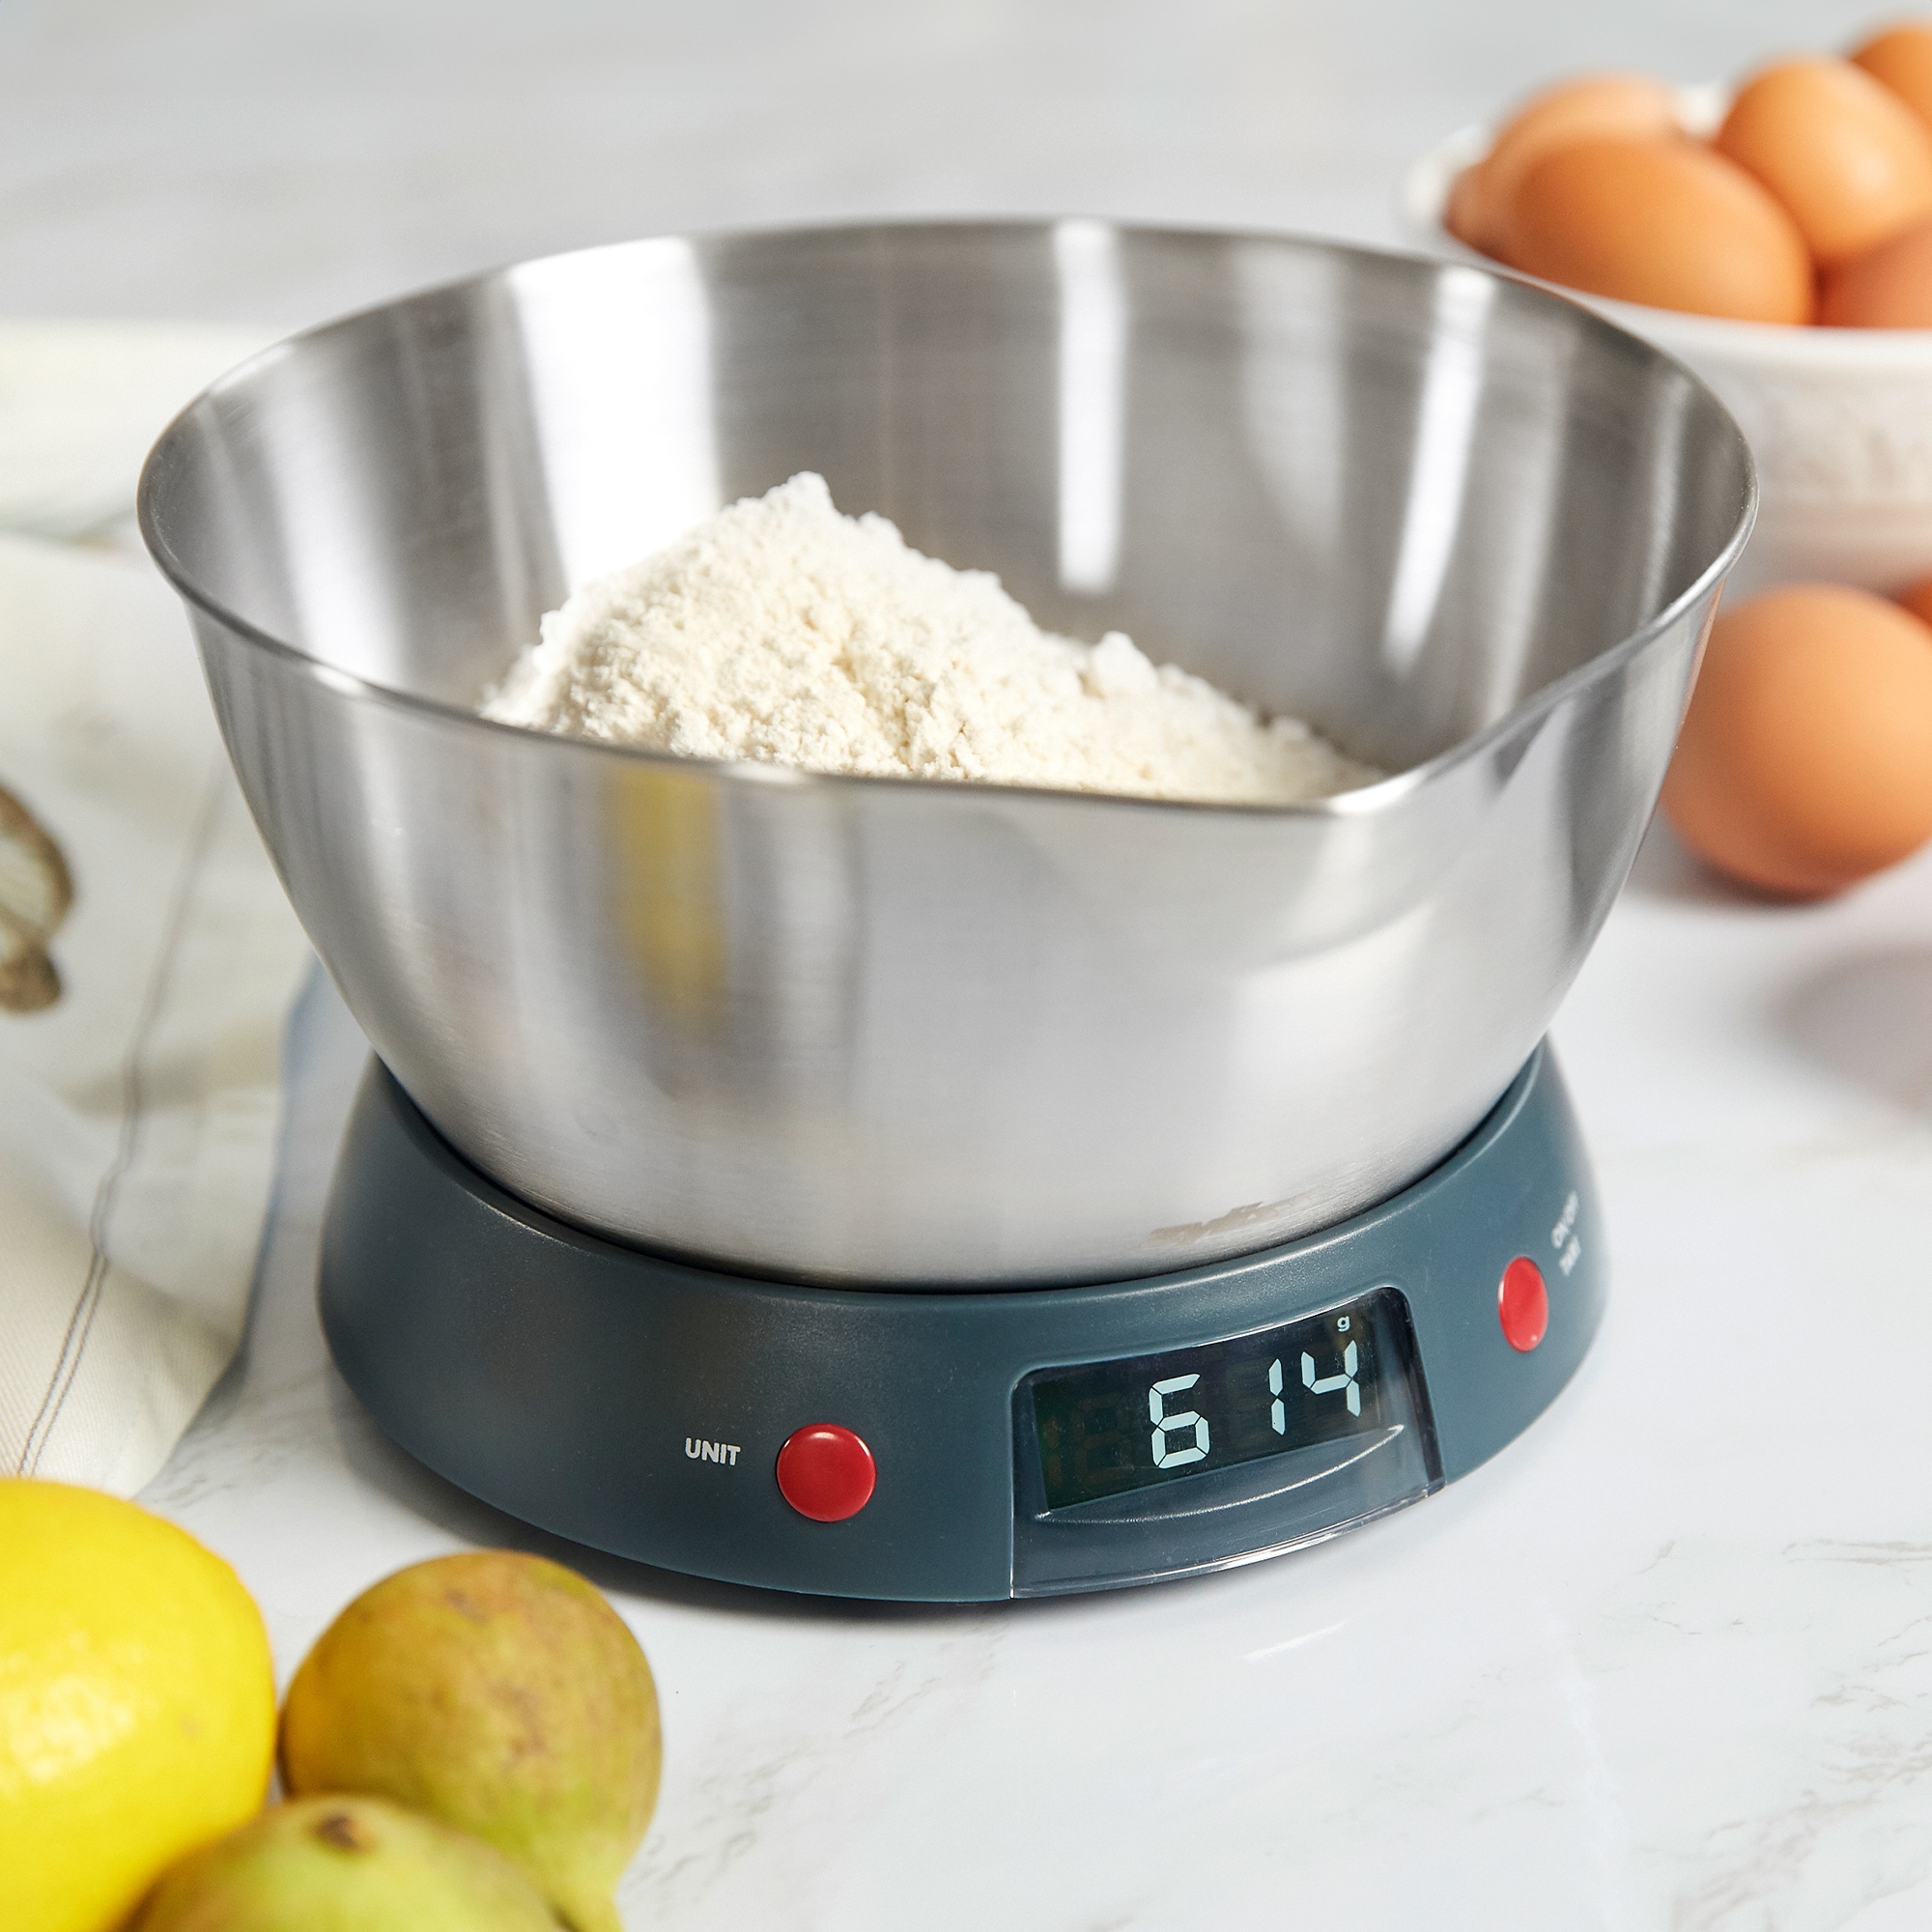 Zyliss - Digital kitchen scales incl. stainless steel bowl